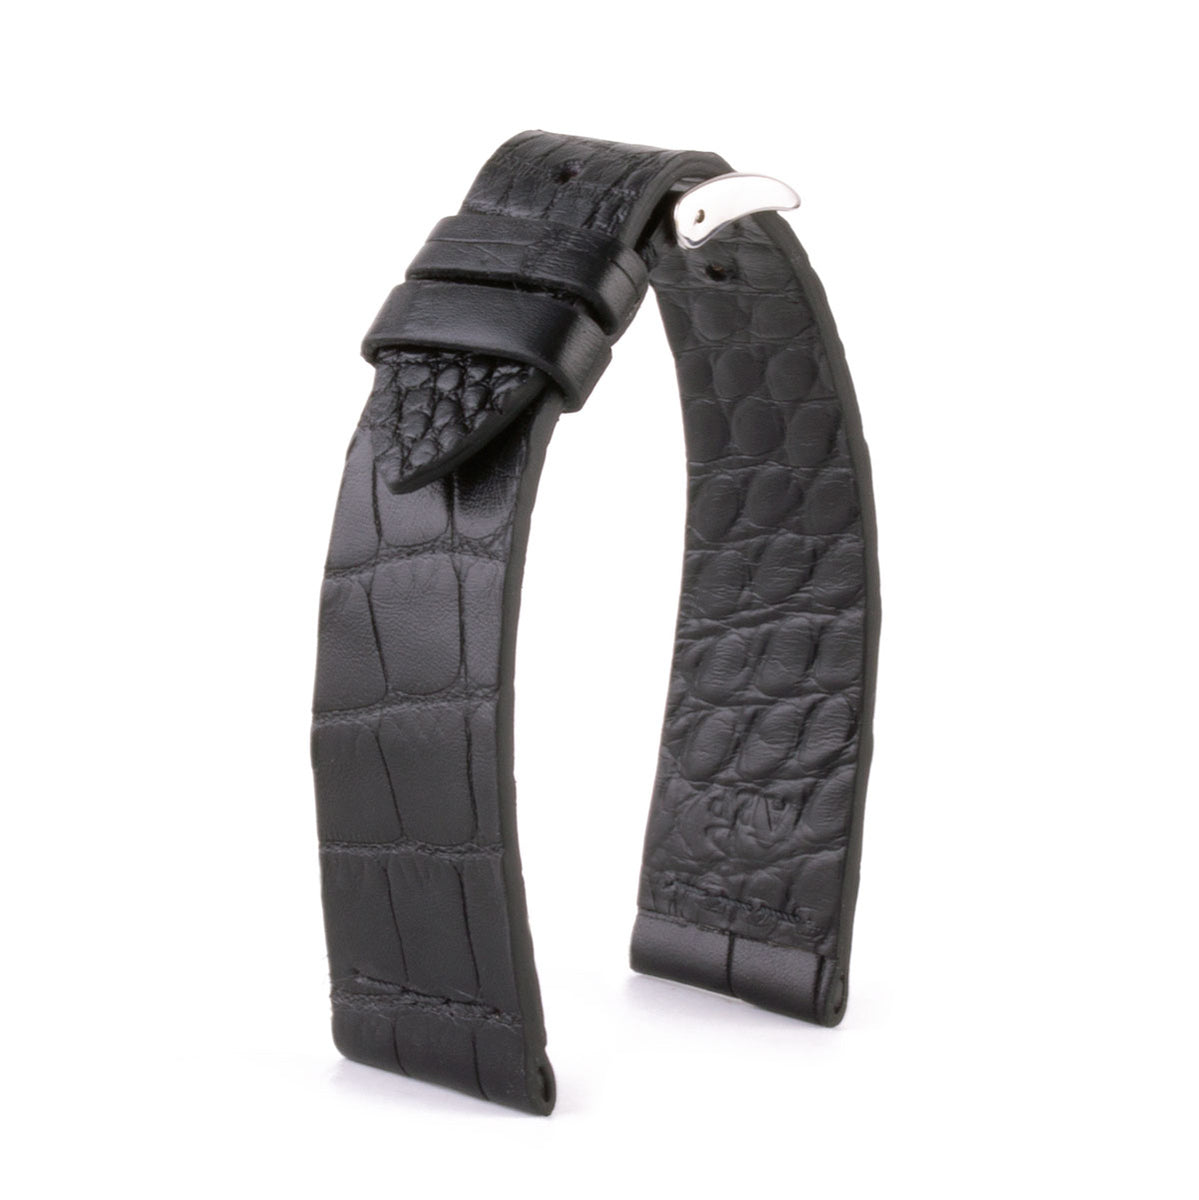 Leather watch strap - Sustainable alligator with contrasted stitching